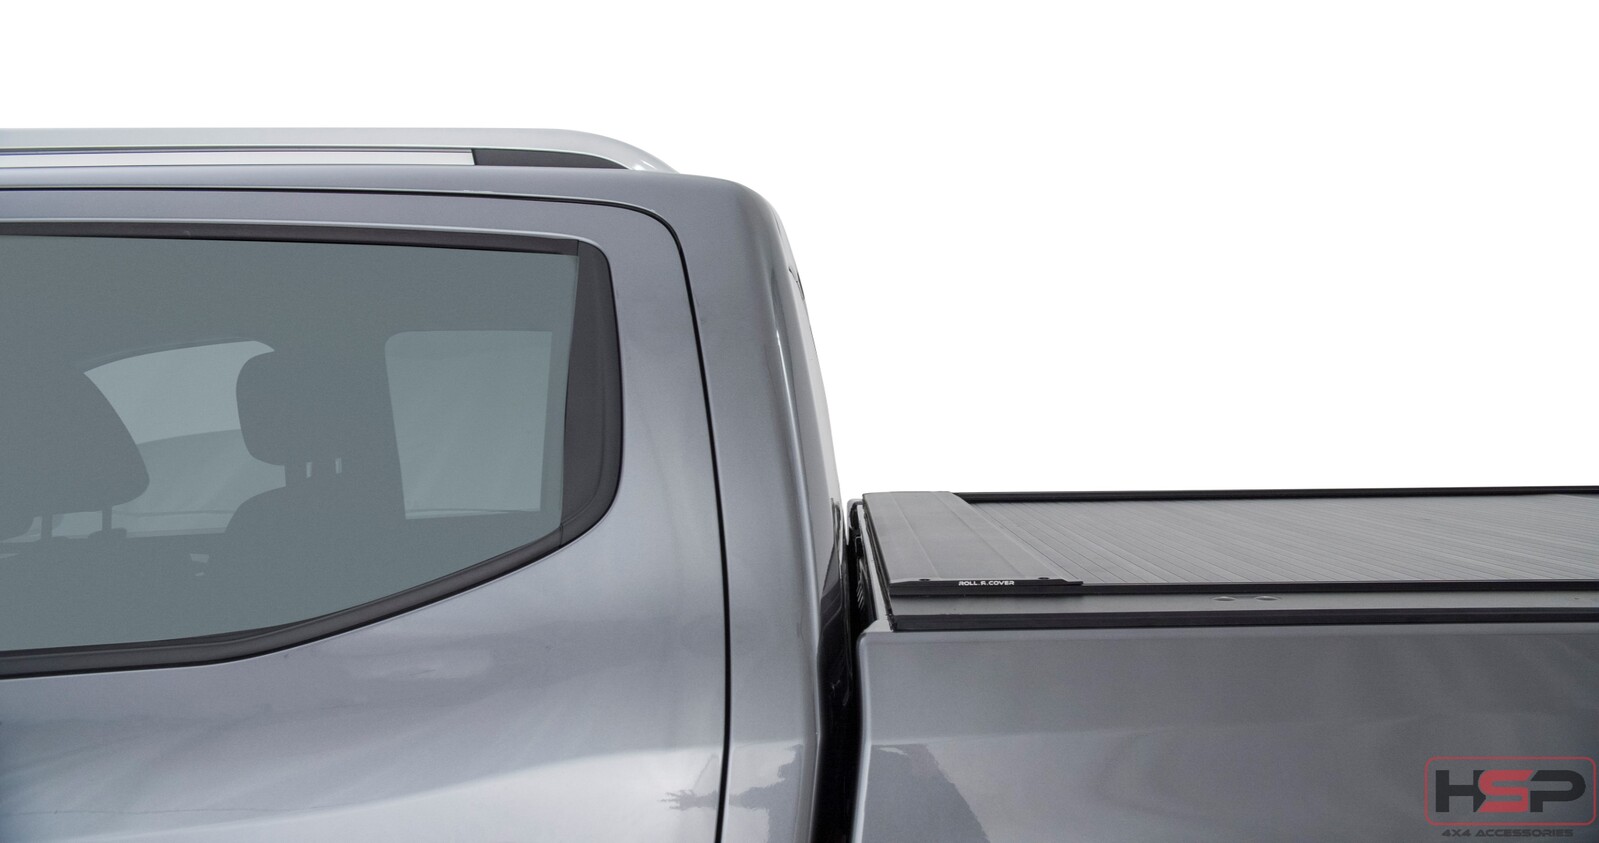 HSP Roll R Cover Series 3 To Suit LDV T60 SK8-2018+ Dual Cab (No Sports Bar)